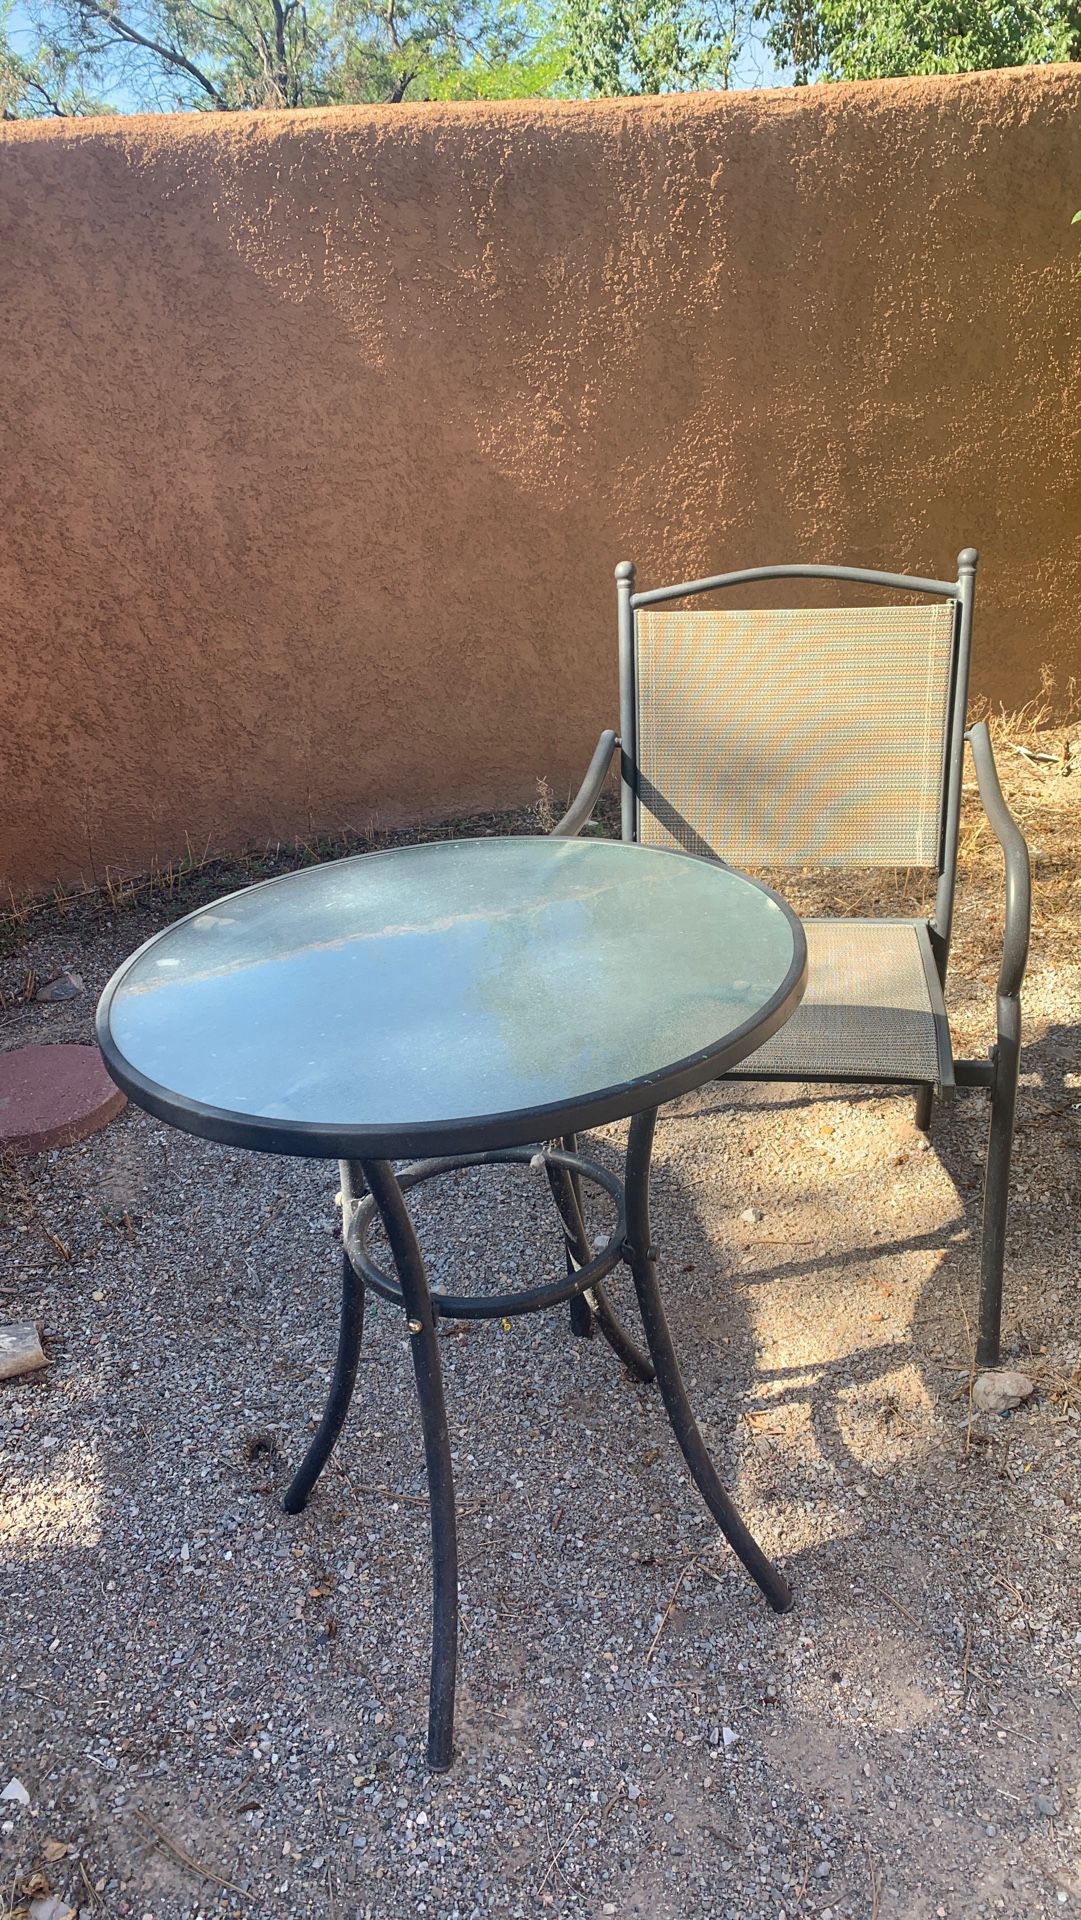 Cute outdoor table with one chair. Need gone ASAP